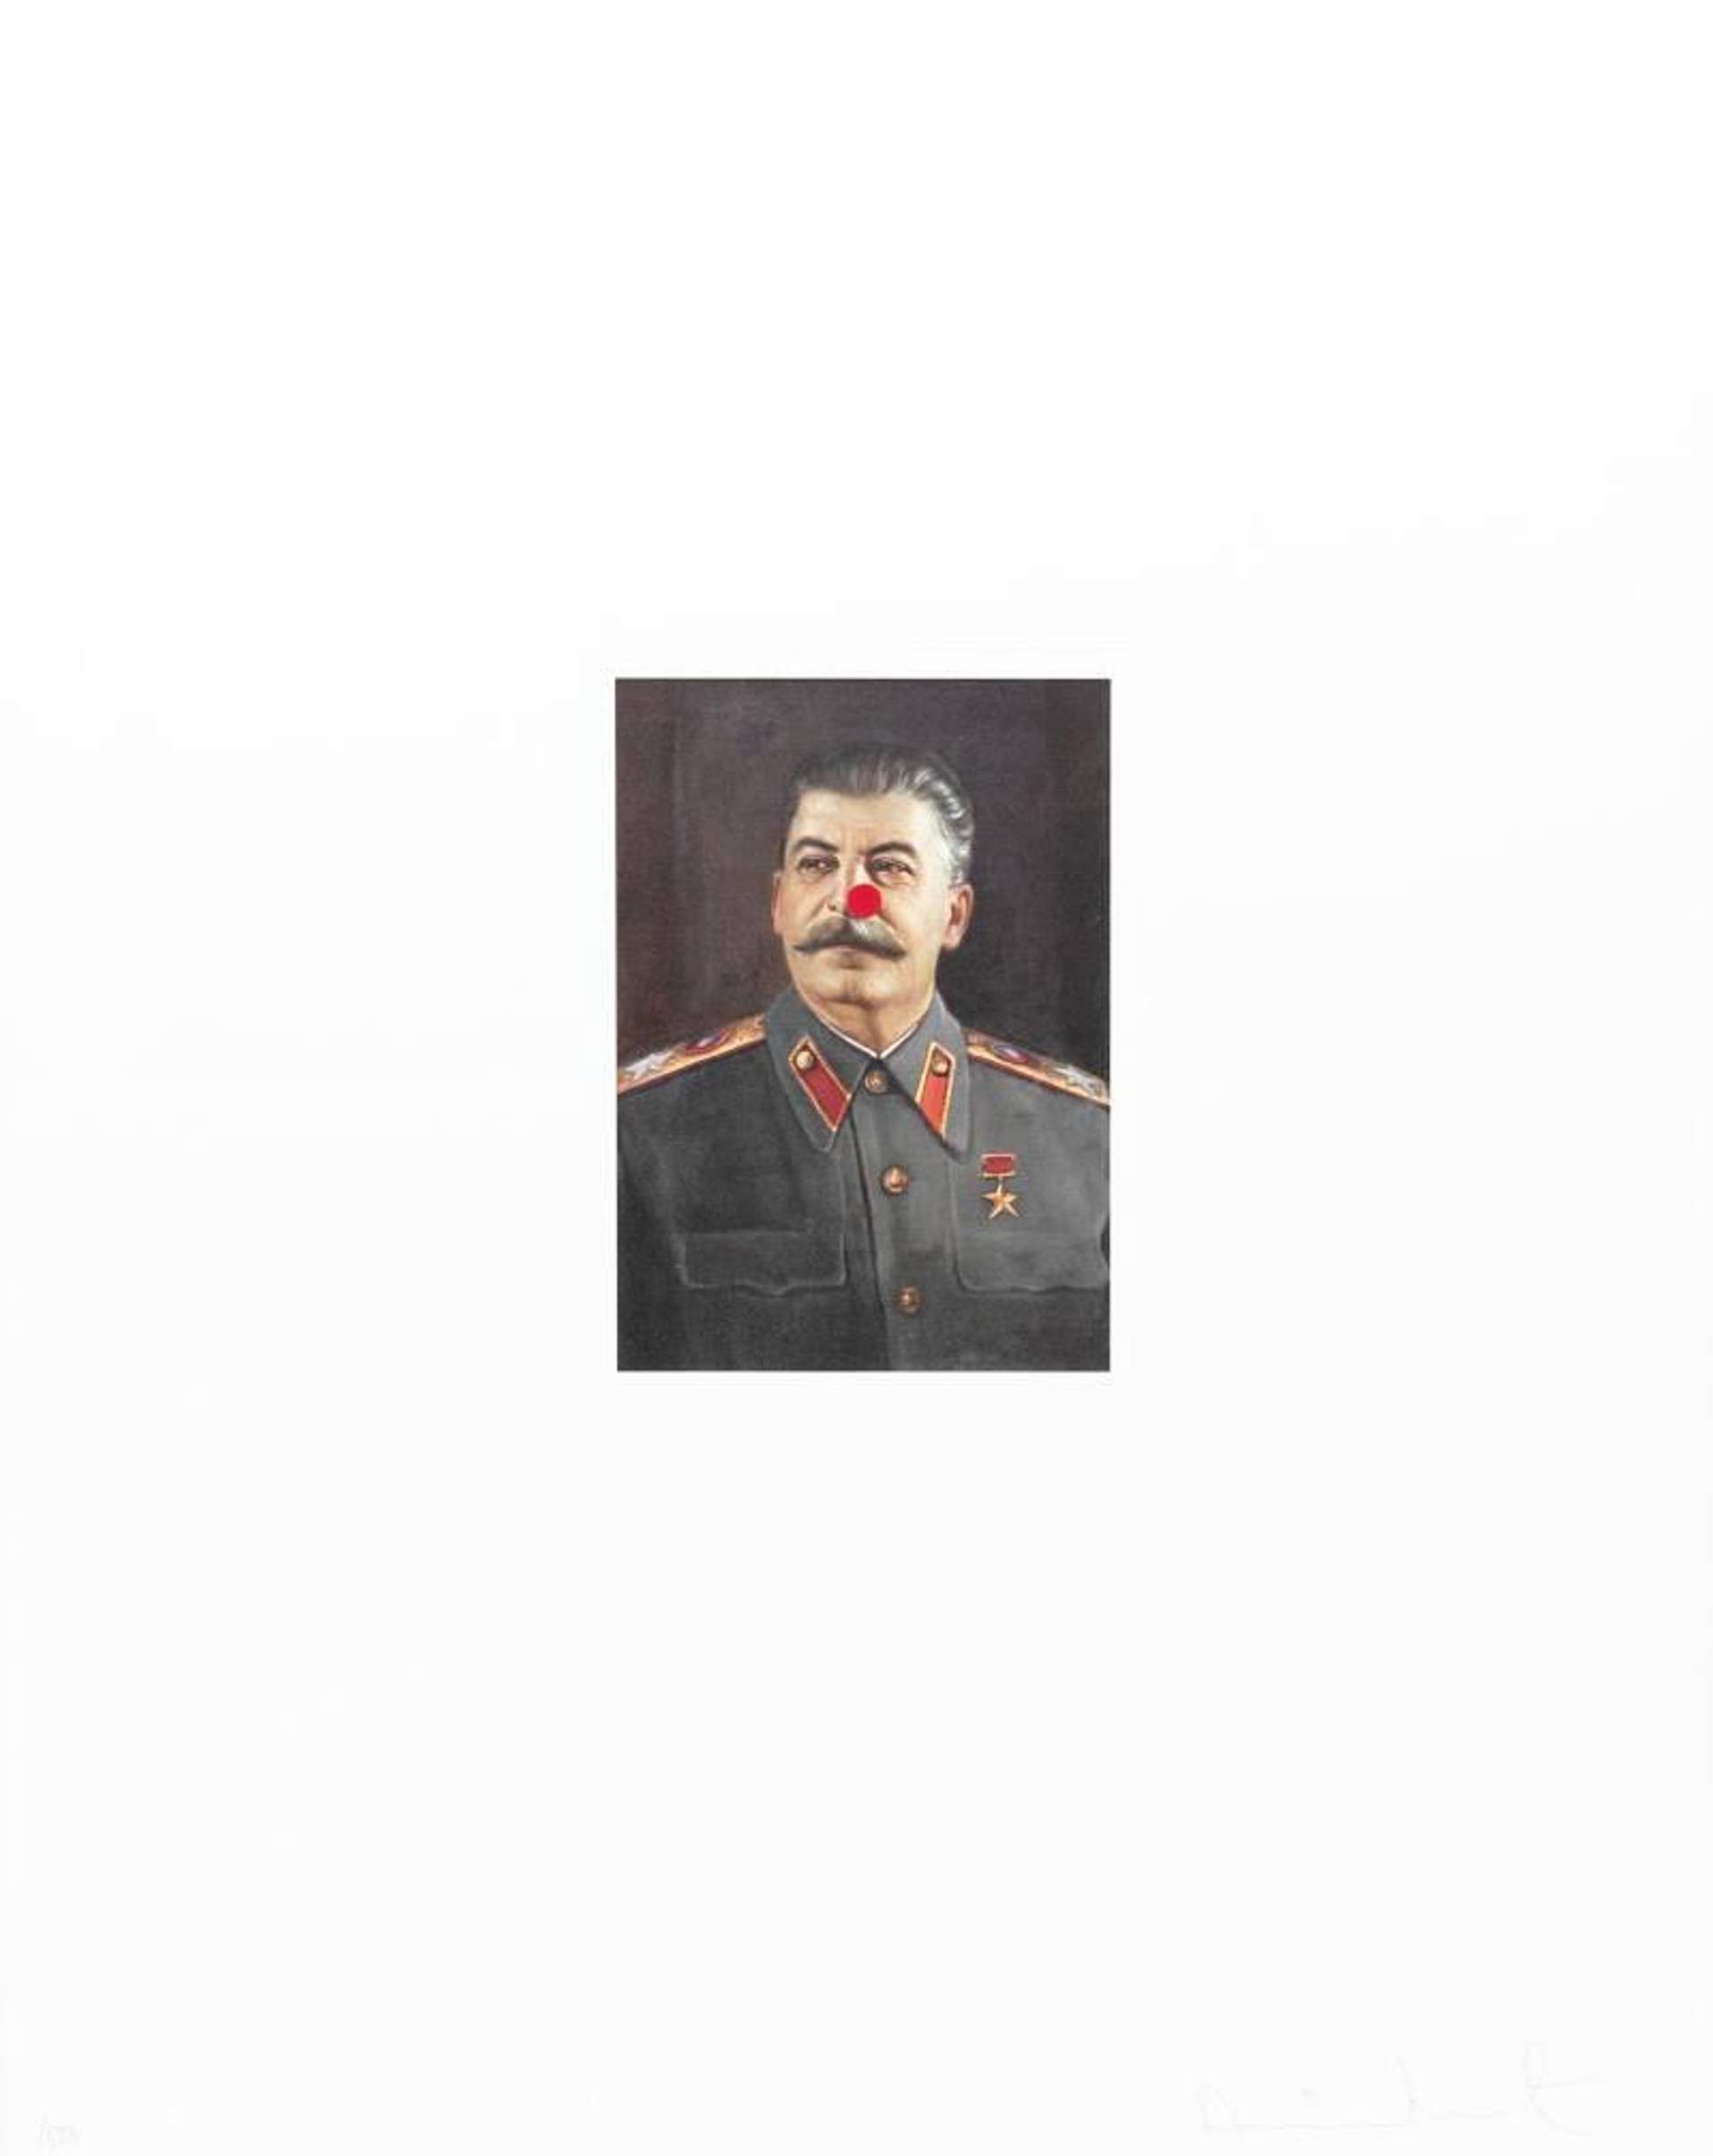 Stalin (Comic Relief) - Signed Print by Damien Hirst 2007 - MyArtBroker